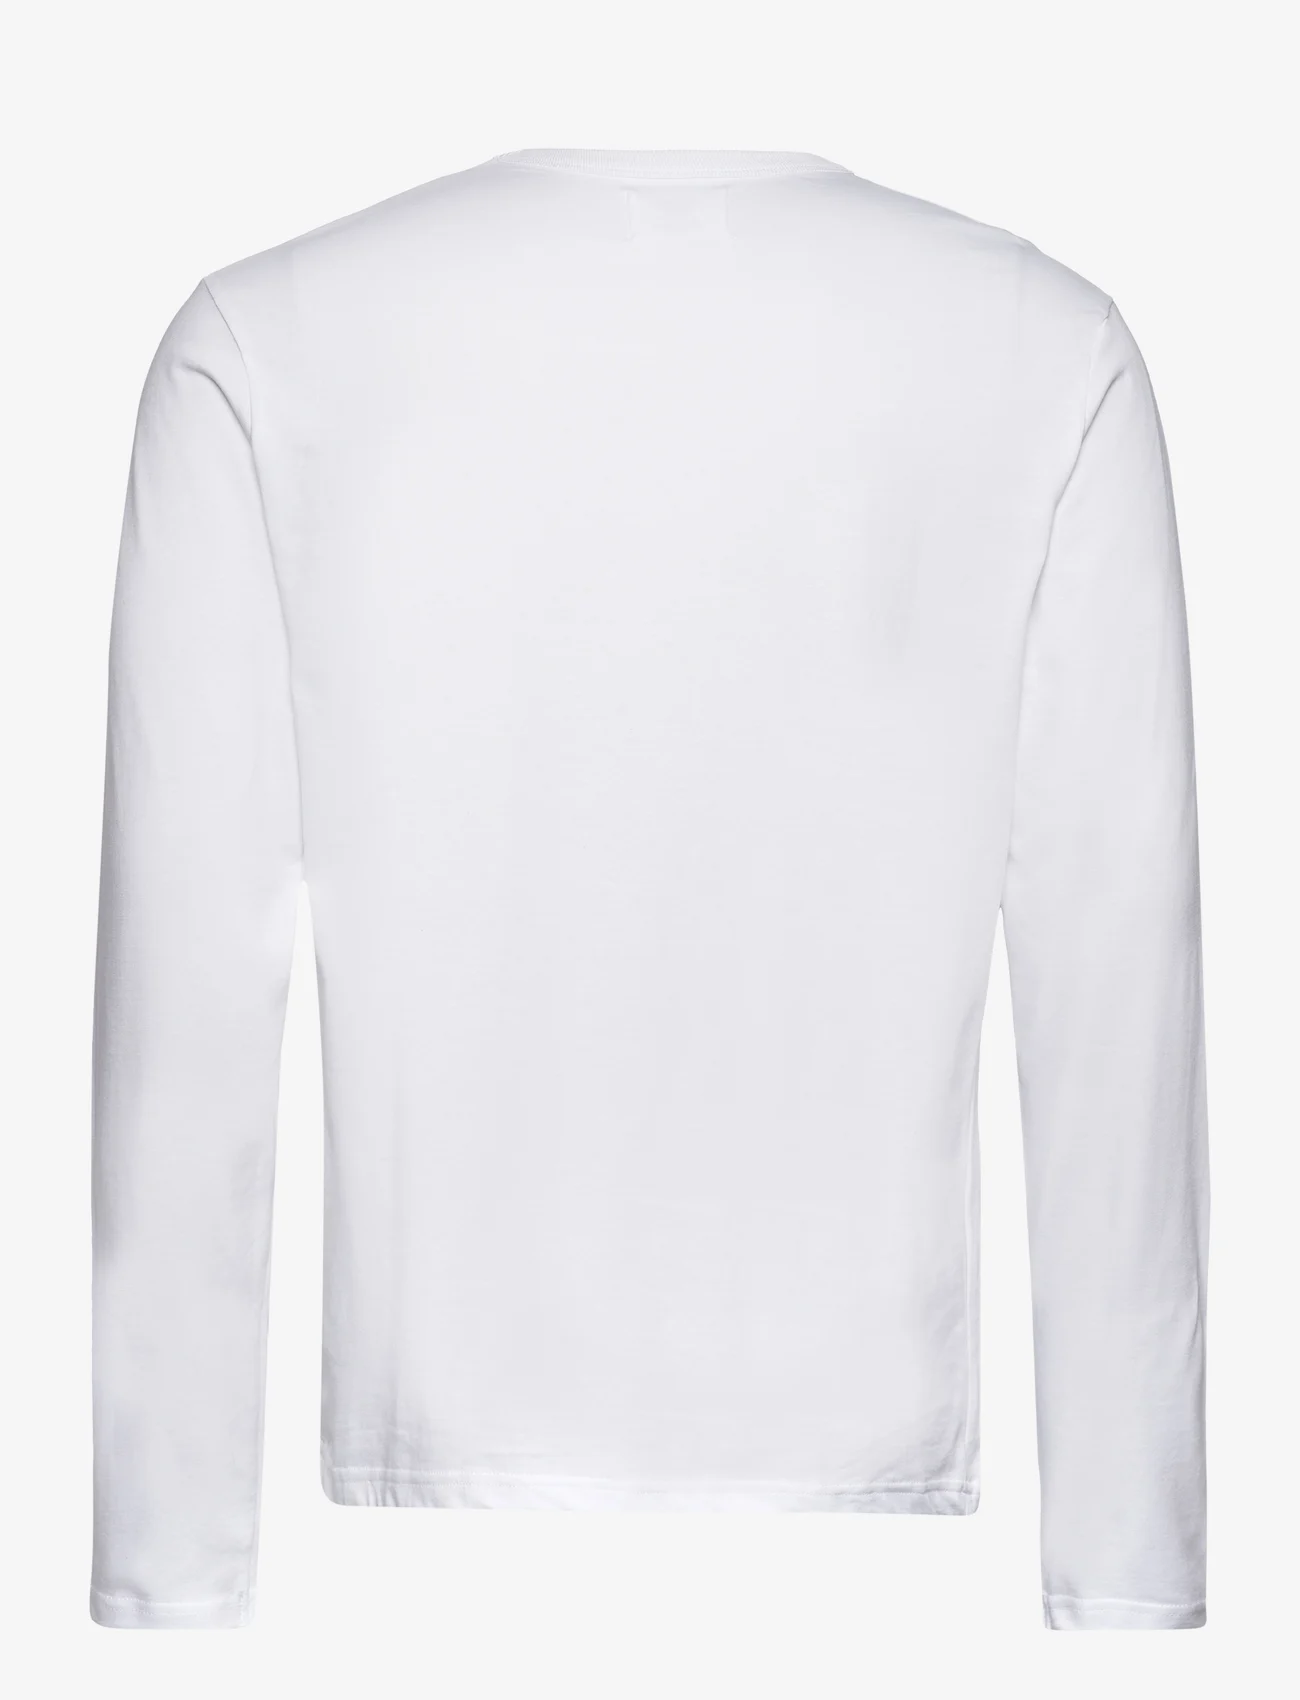 Double A by Wood Wood - Mel longsleeve - t-shirt & tops - white - 1